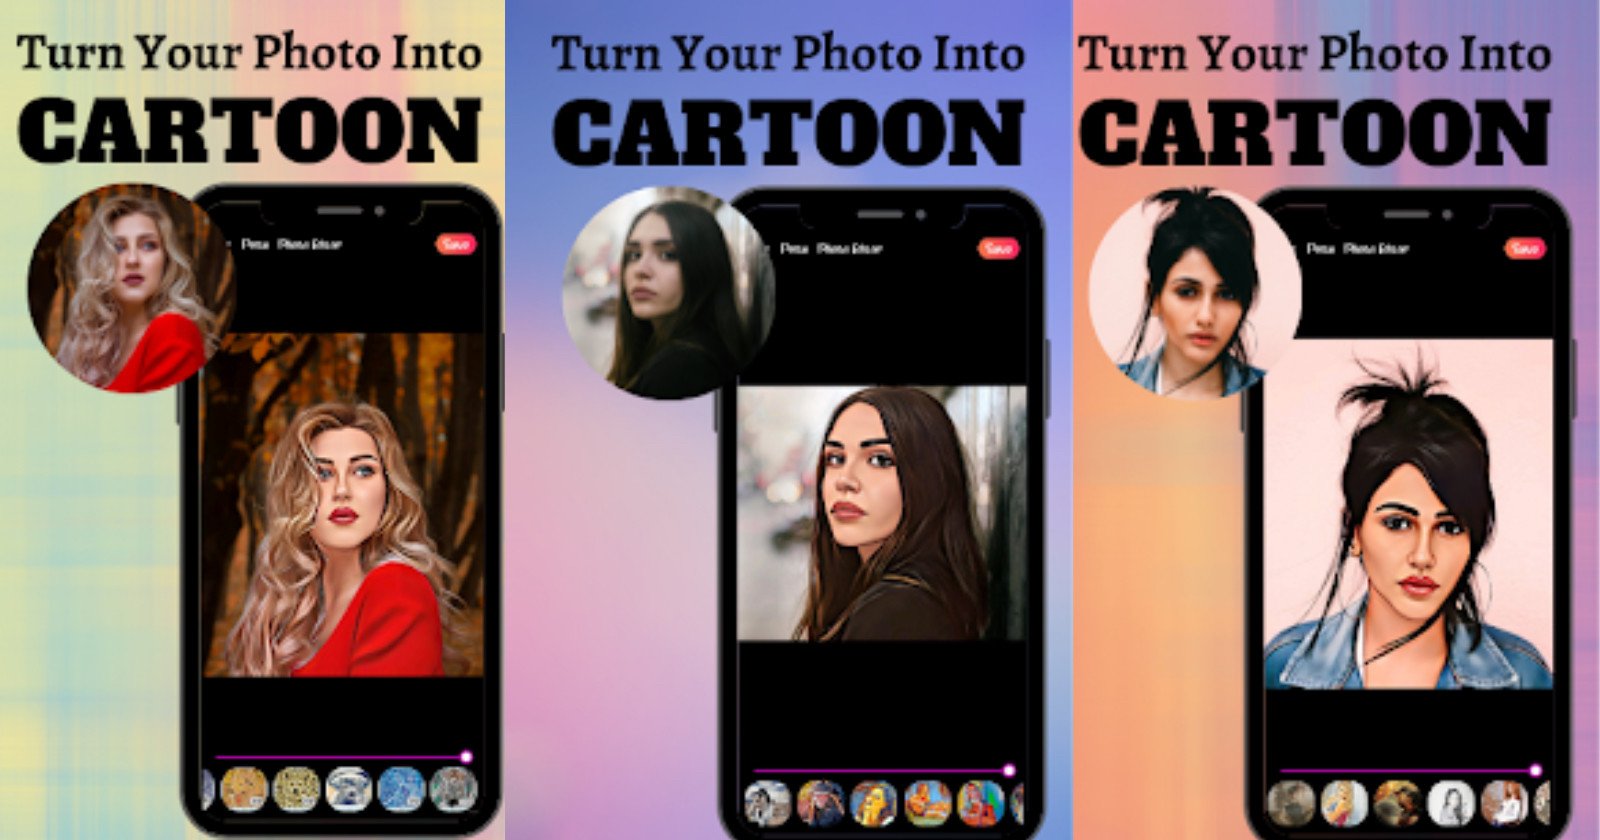 AI Photo Editing Apps are Being Targeted by Cyber Criminals